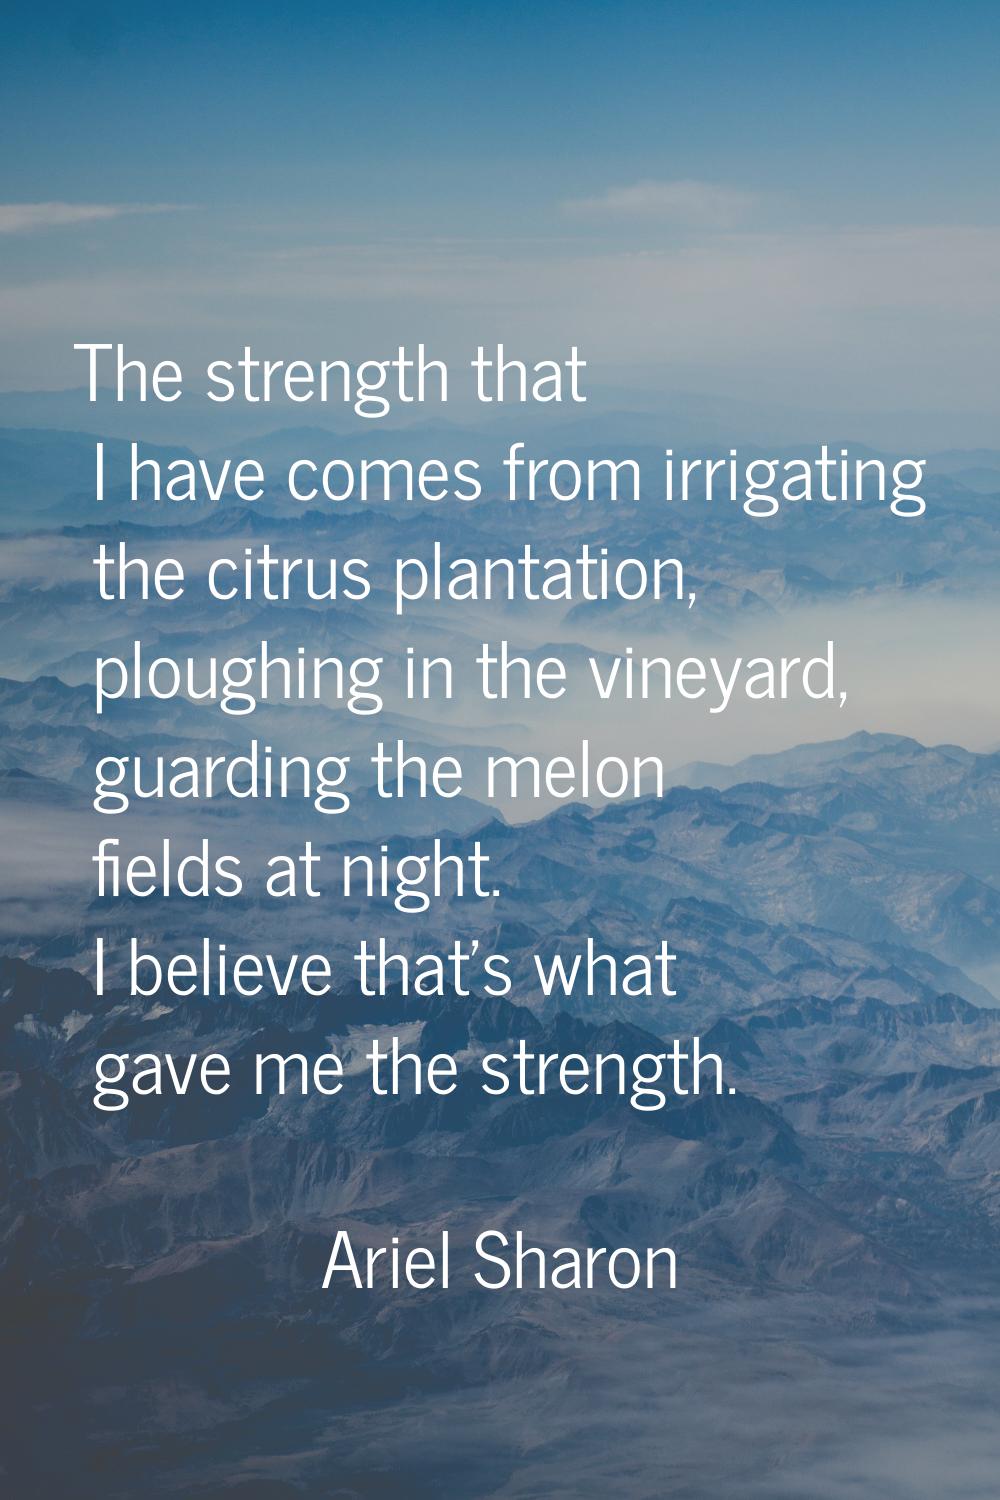 The strength that I have comes from irrigating the citrus plantation, ploughing in the vineyard, gu